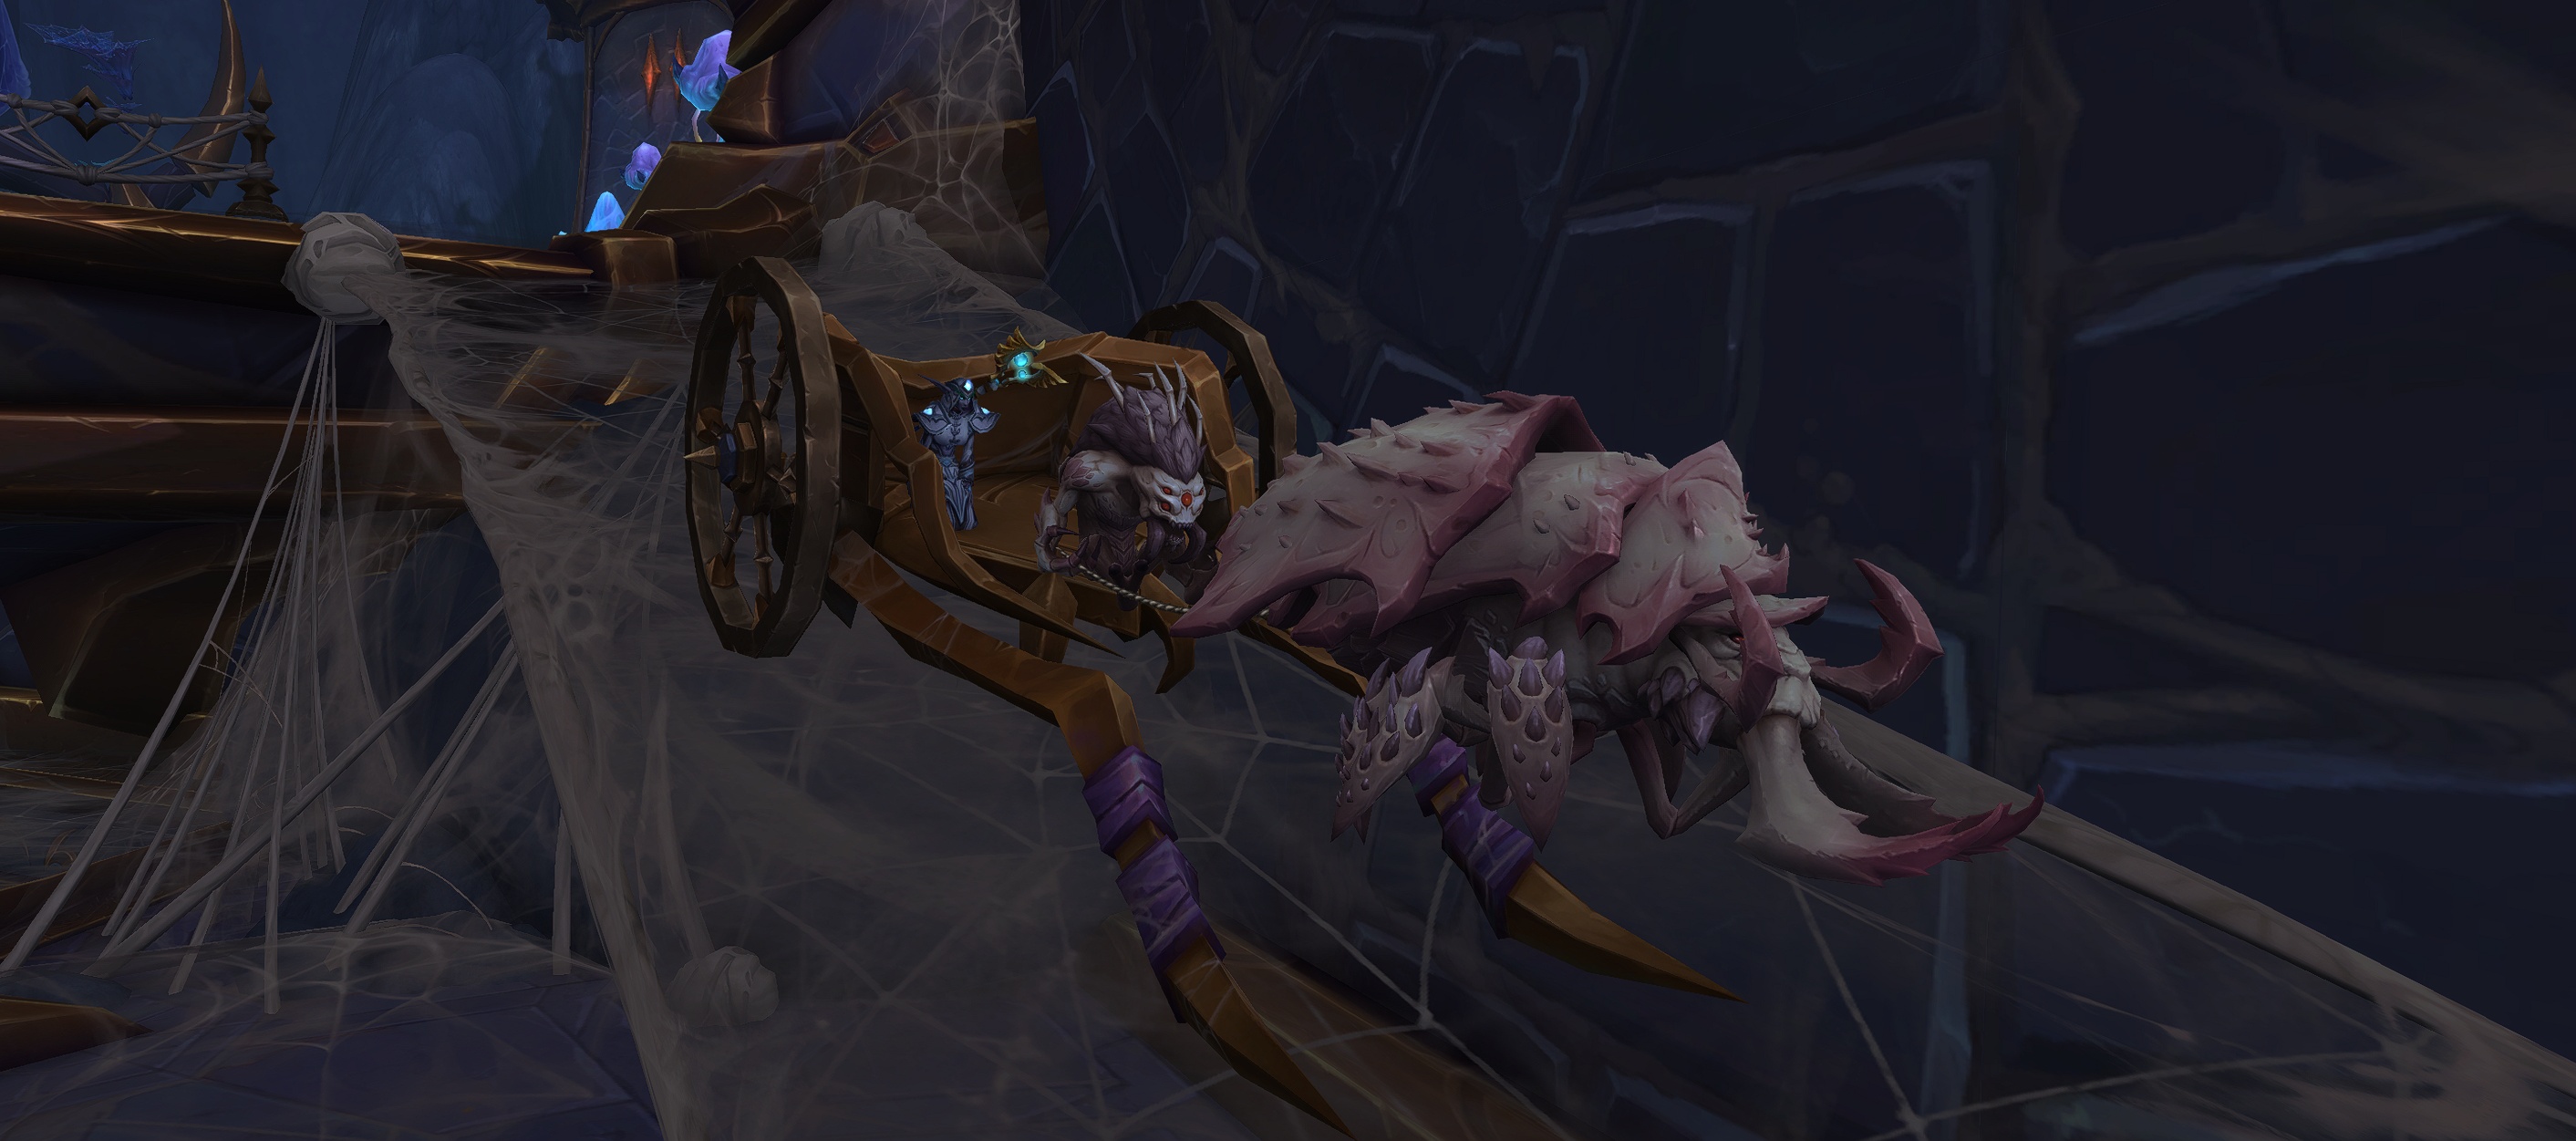 A Ride Among Bugs - High Hollows Carriage in Nerub'ar